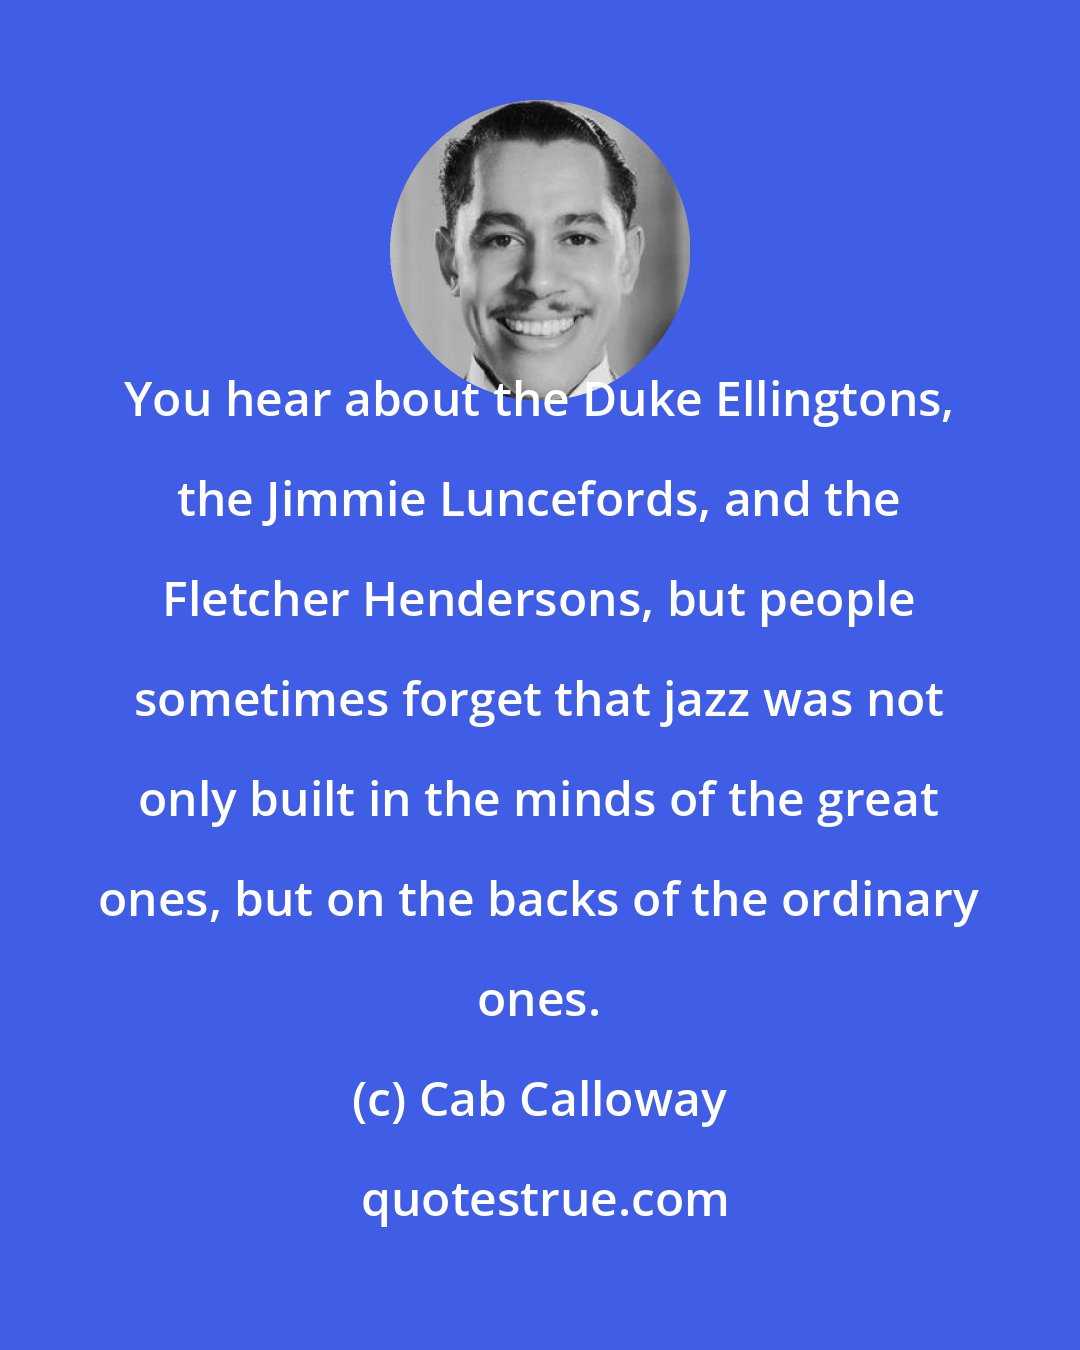 Cab Calloway: You hear about the Duke Ellingtons, the Jimmie Luncefords, and the Fletcher Hendersons, but people sometimes forget that jazz was not only built in the minds of the great ones, but on the backs of the ordinary ones.